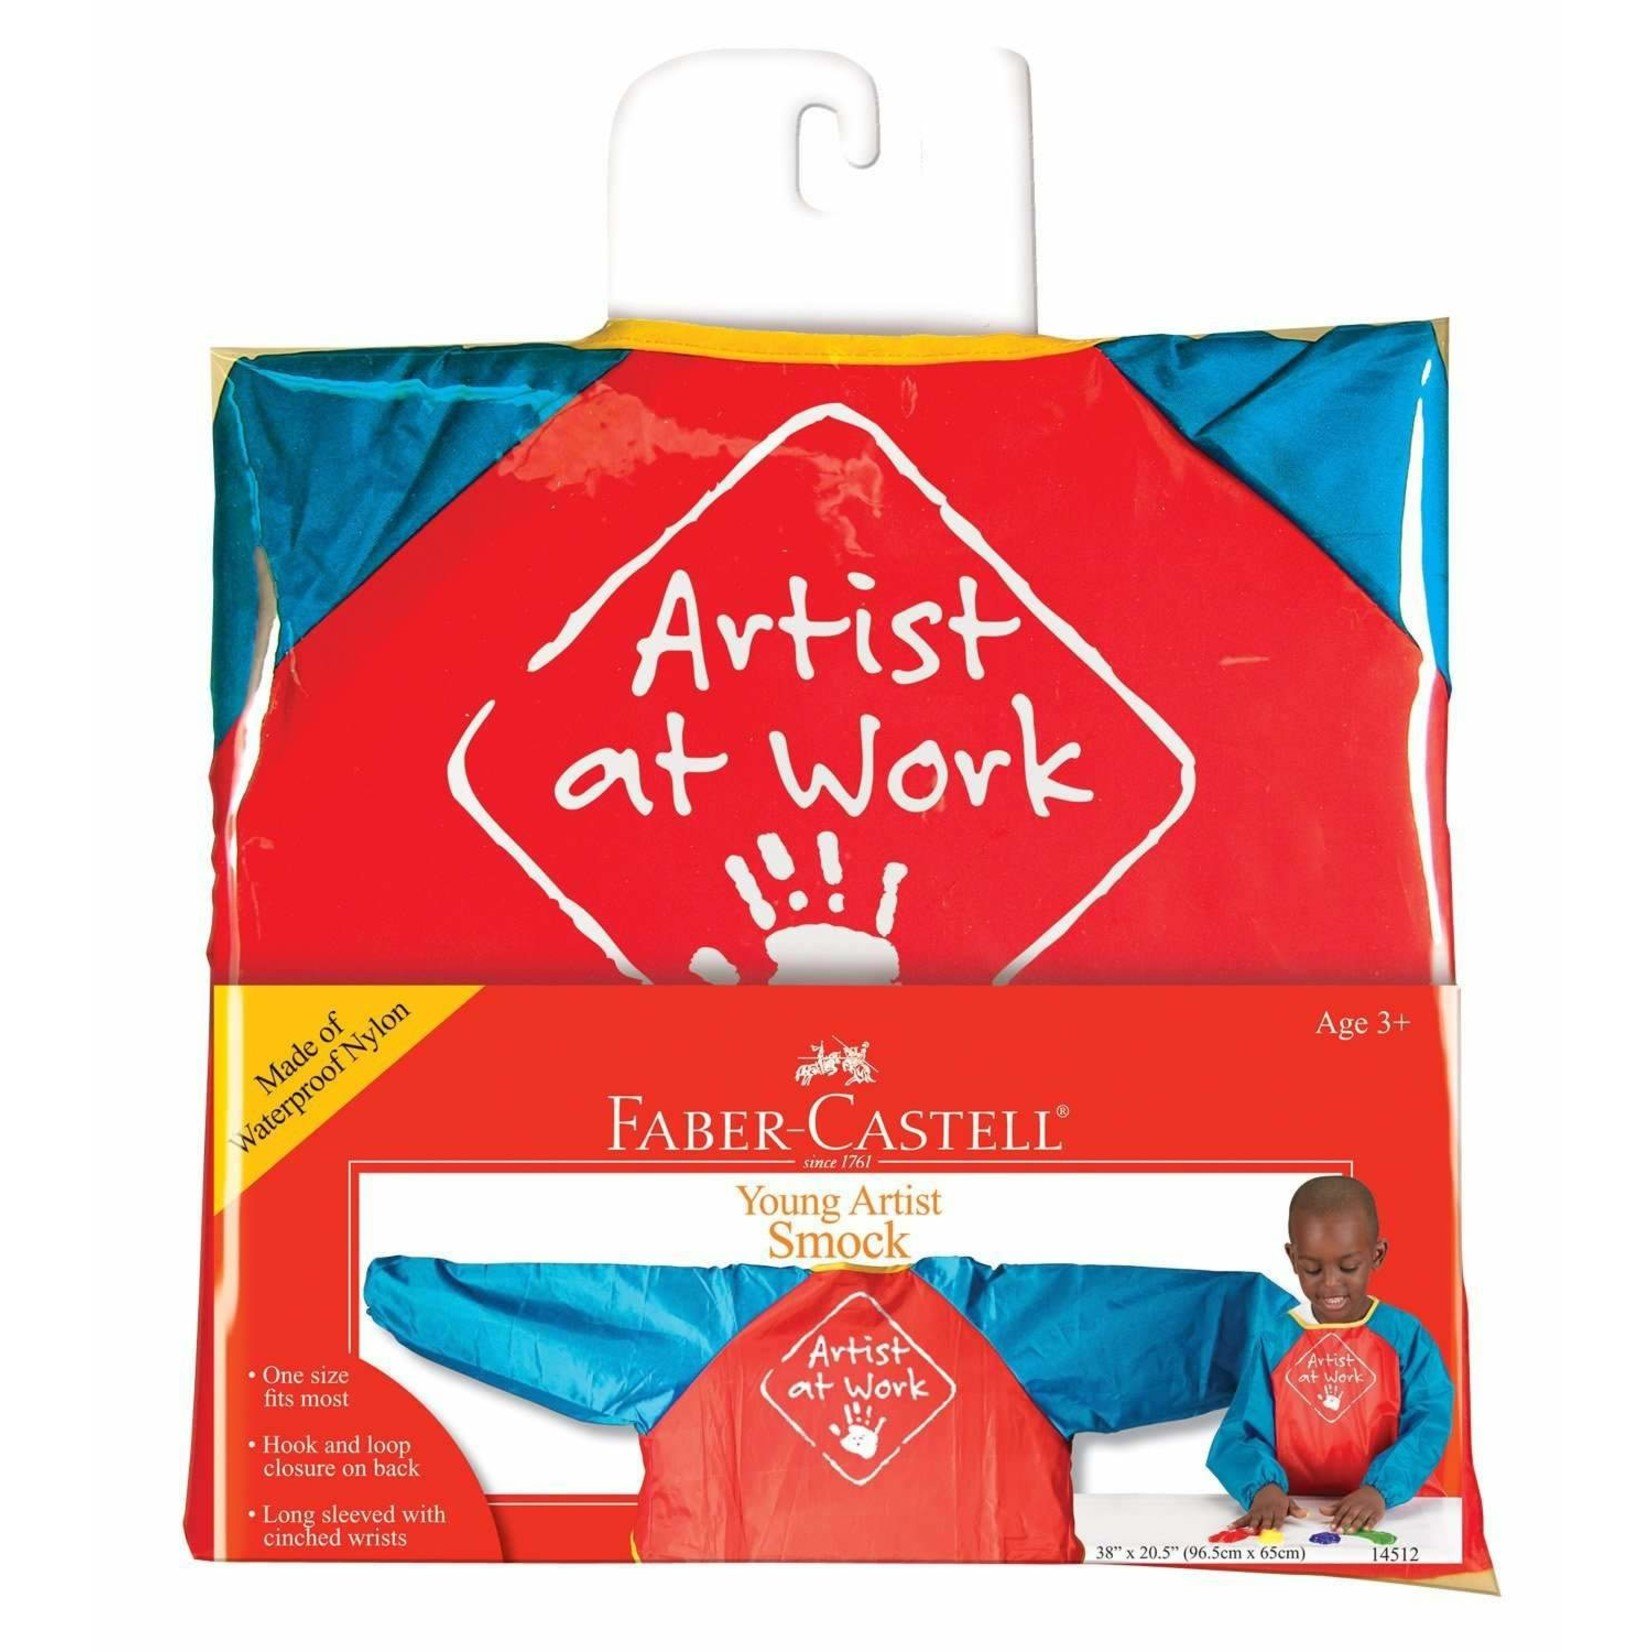 FABER-CASTELL YOUNG ARTIST SMOCK